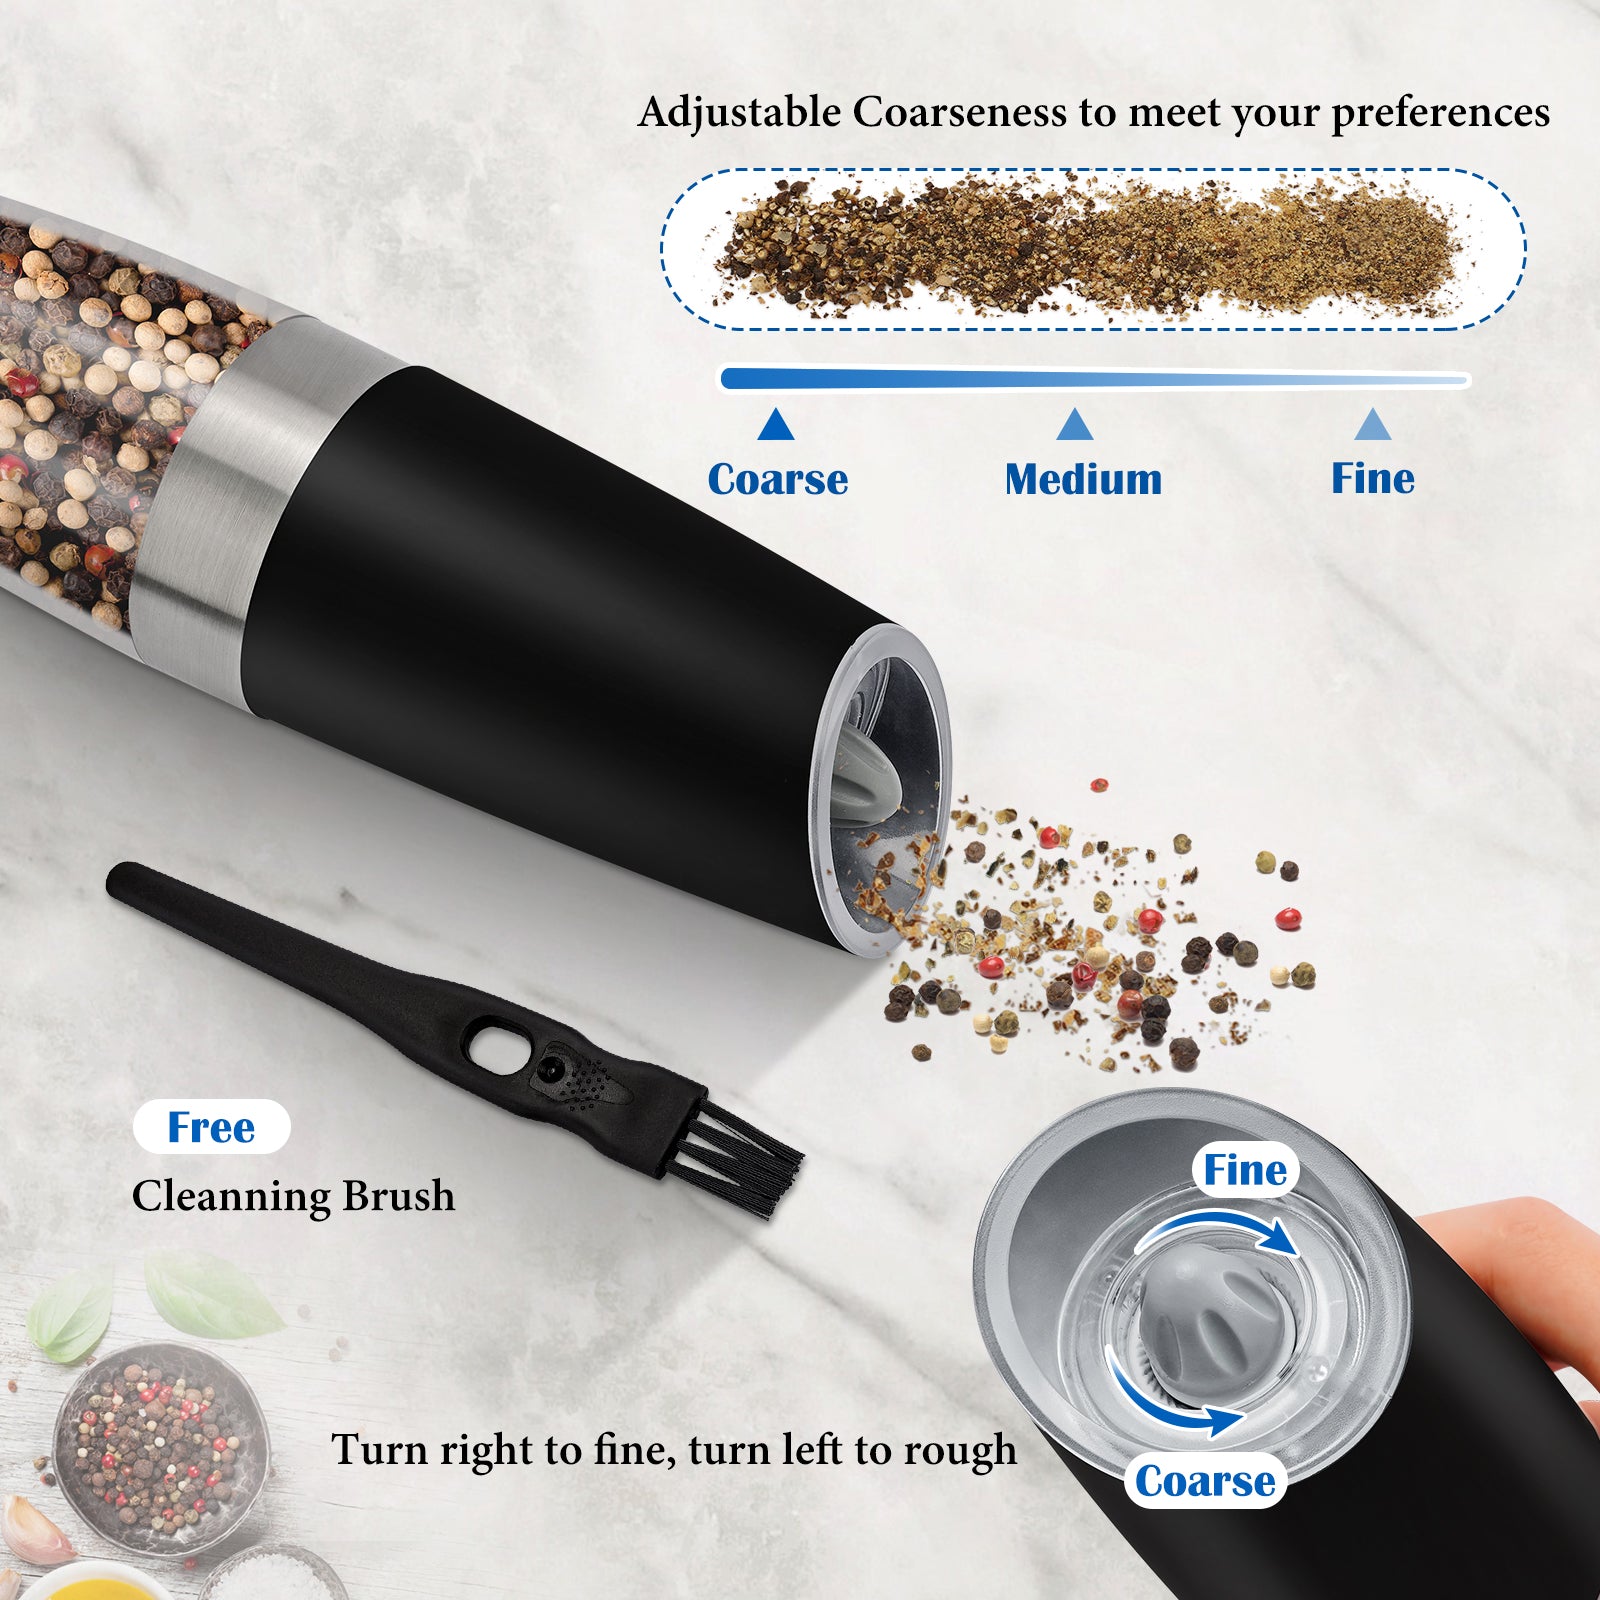 Graviti Electric Pepper Mill: Simply flip it over to start grinding